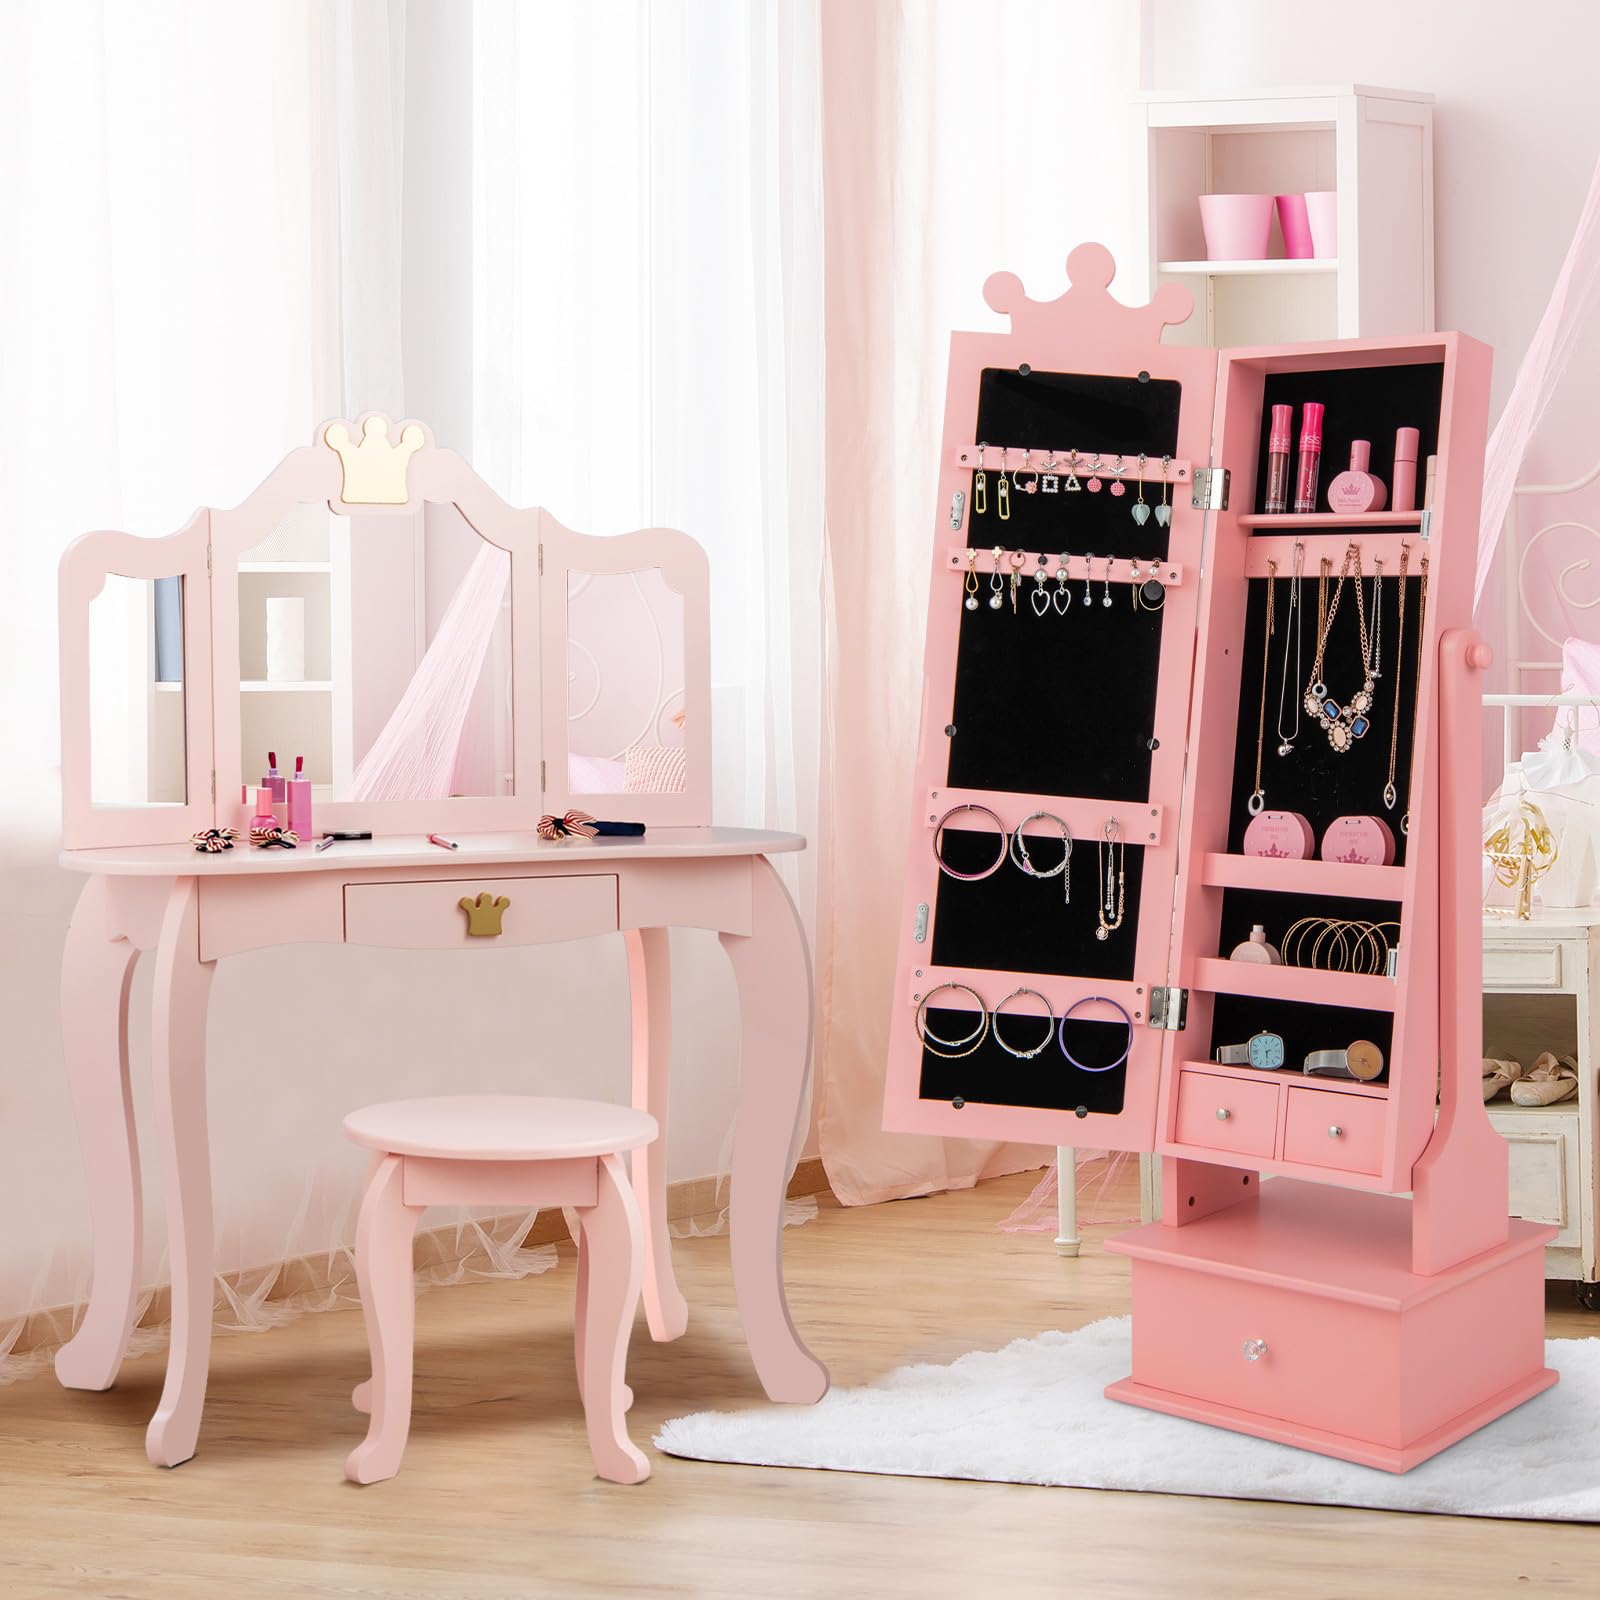 CHARMAID Jewelry Armoire Cabinet for Kids